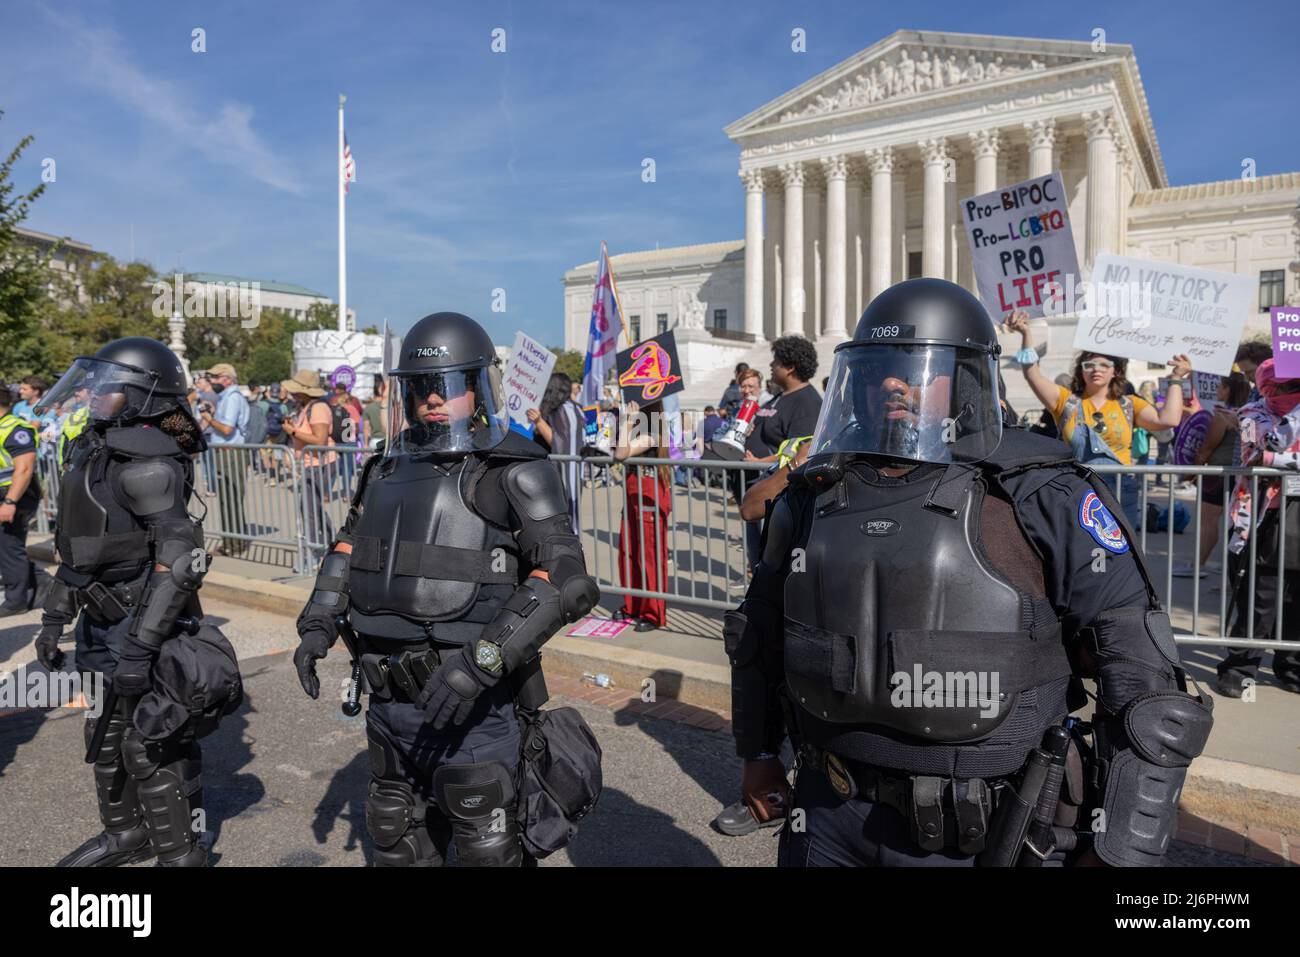 WASHINGTON, D.C. – October 2, 2021: United States Capitol Police are seen near the U.S. Supreme Court during abortion-related protests. Stock Photo